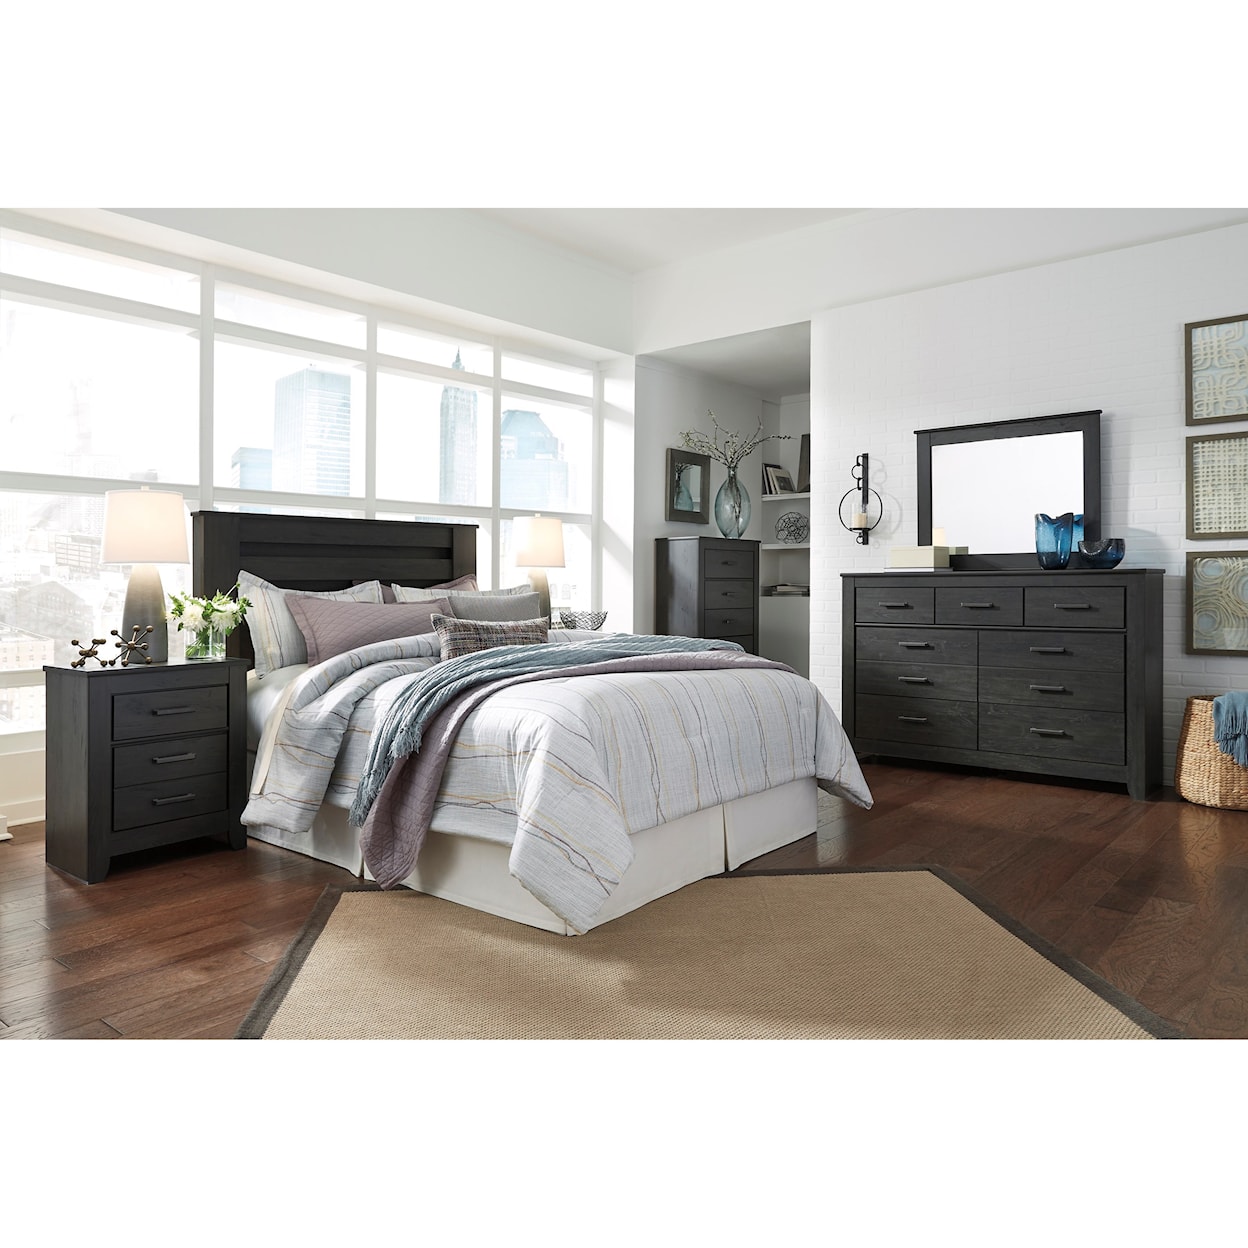 Signature Design by Ashley Brinxton Queen/Full Bedroom Group